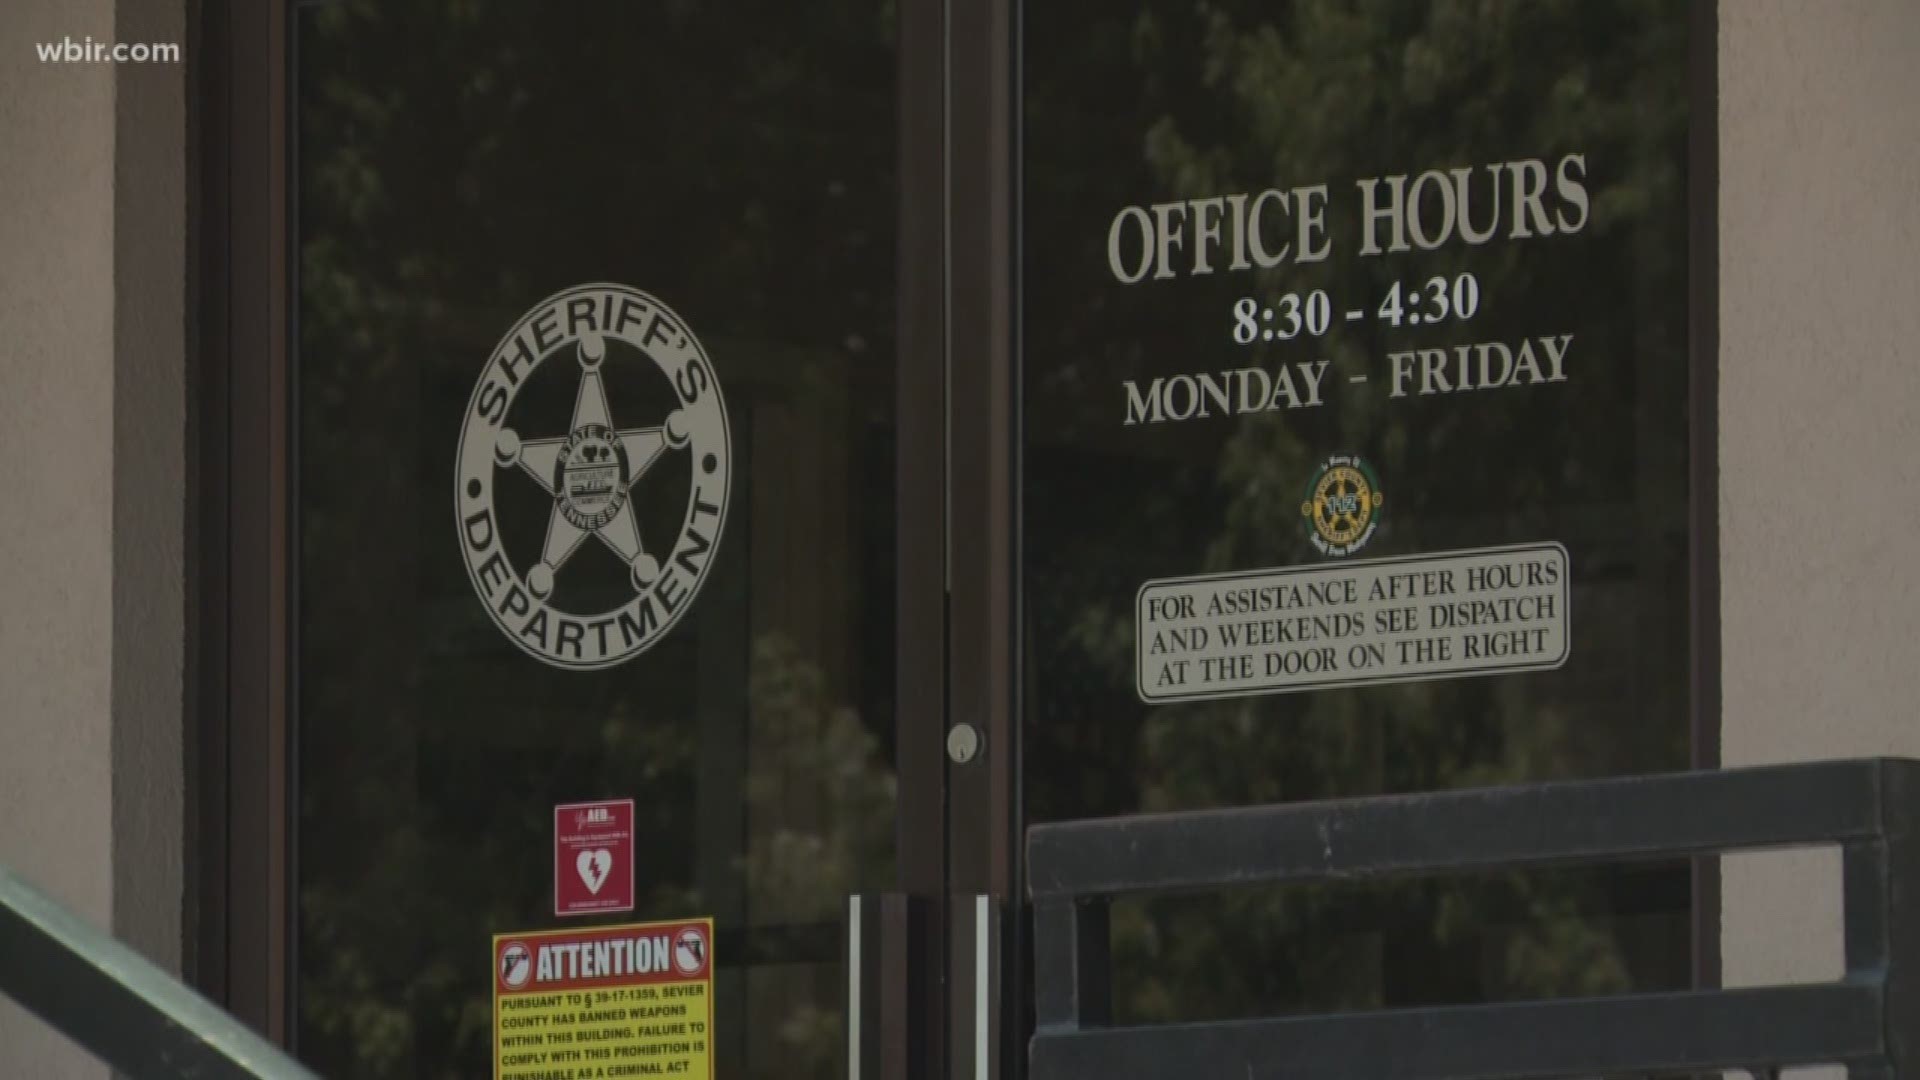 The Sevier County Sheriff's Office wants the public to weigh in on whether they feel safe.